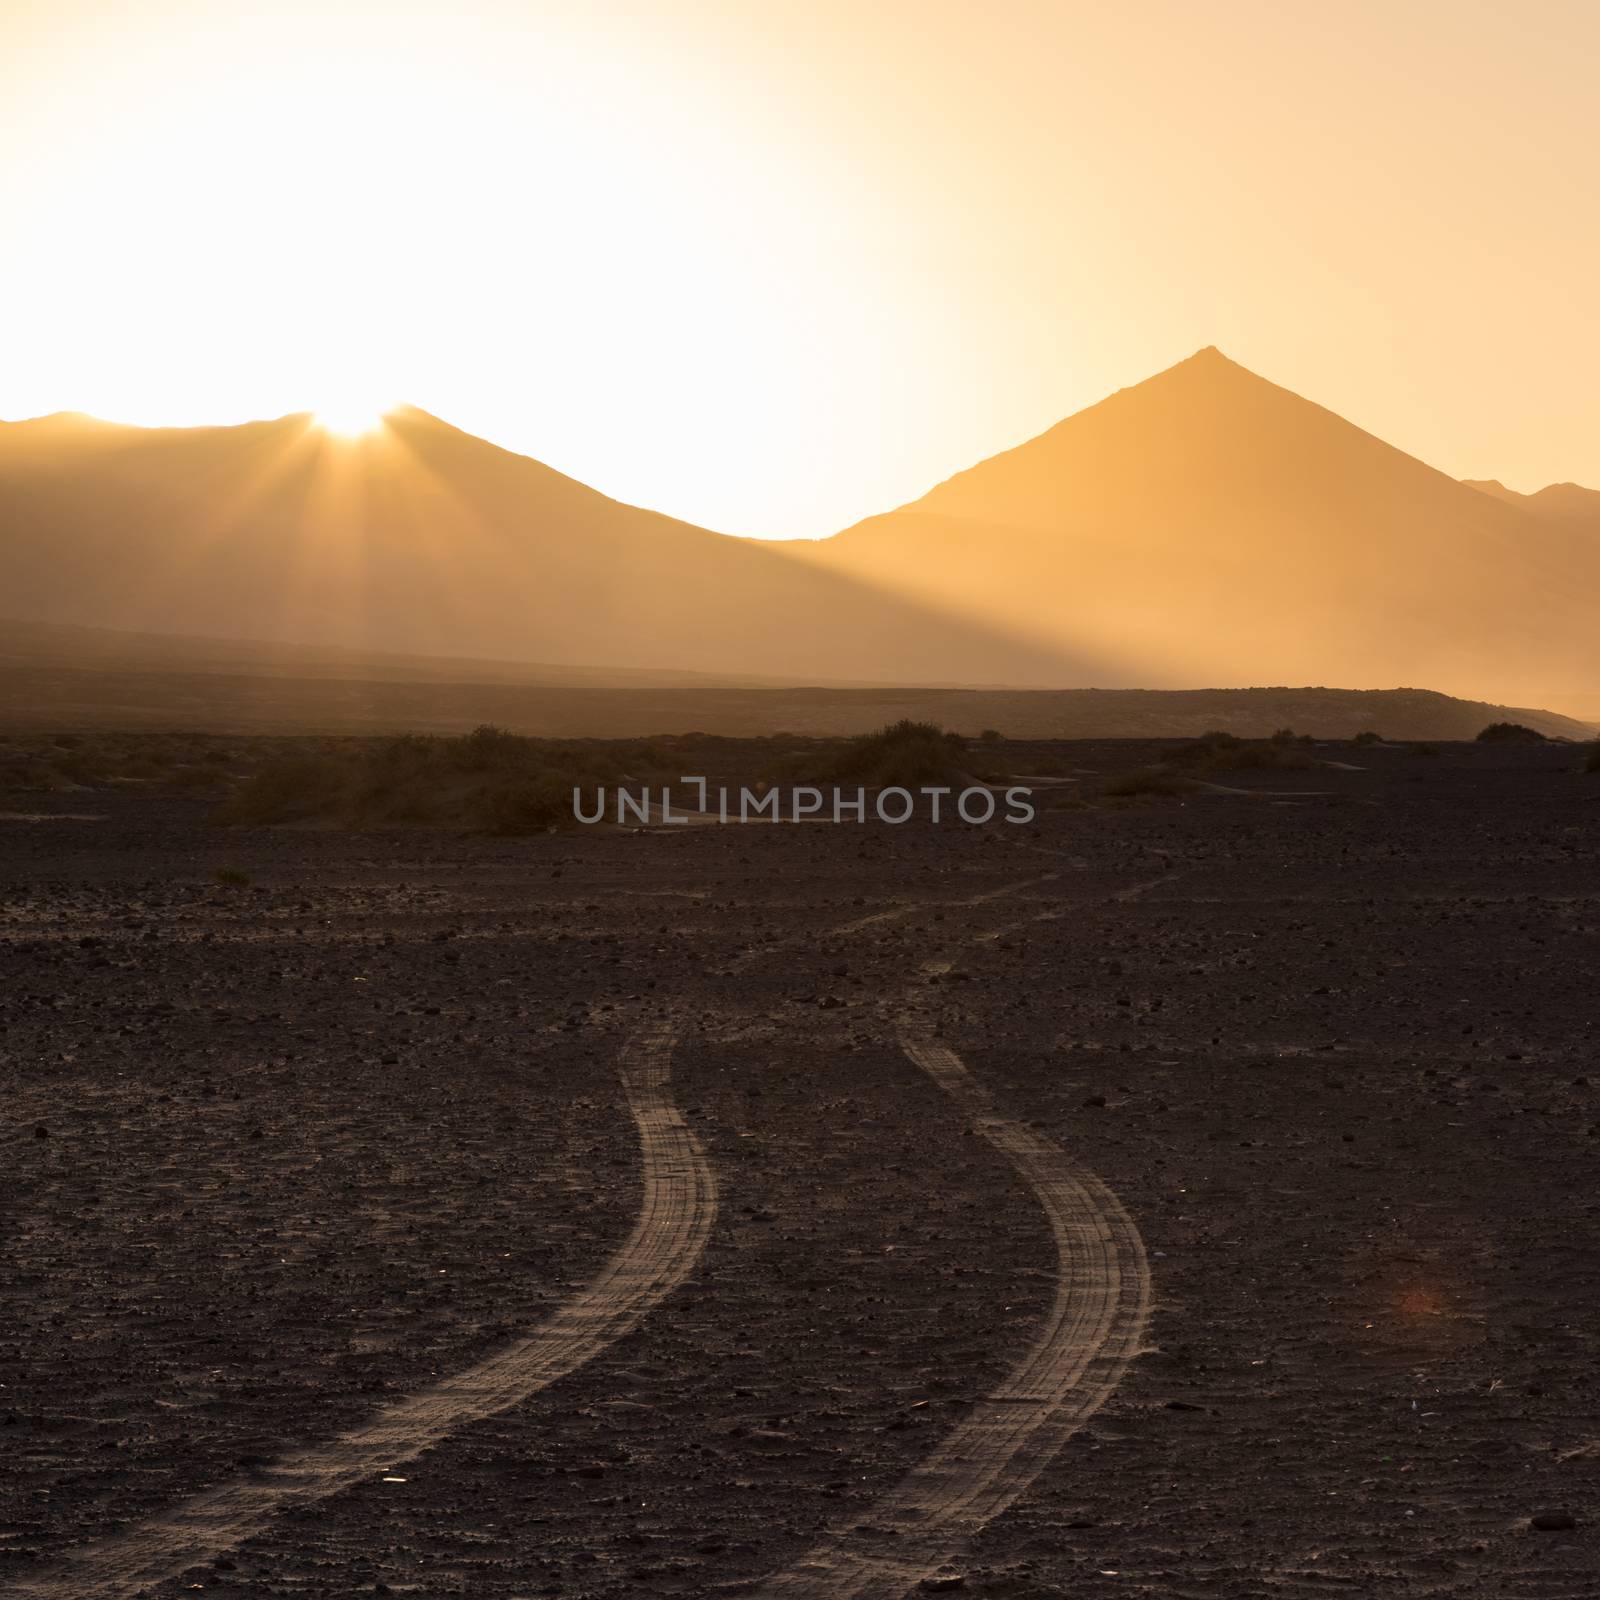 Car tire tracks in sand. Dirt road vanishing to the mountains sunlit in sunset. Copy space for text. Square composition.